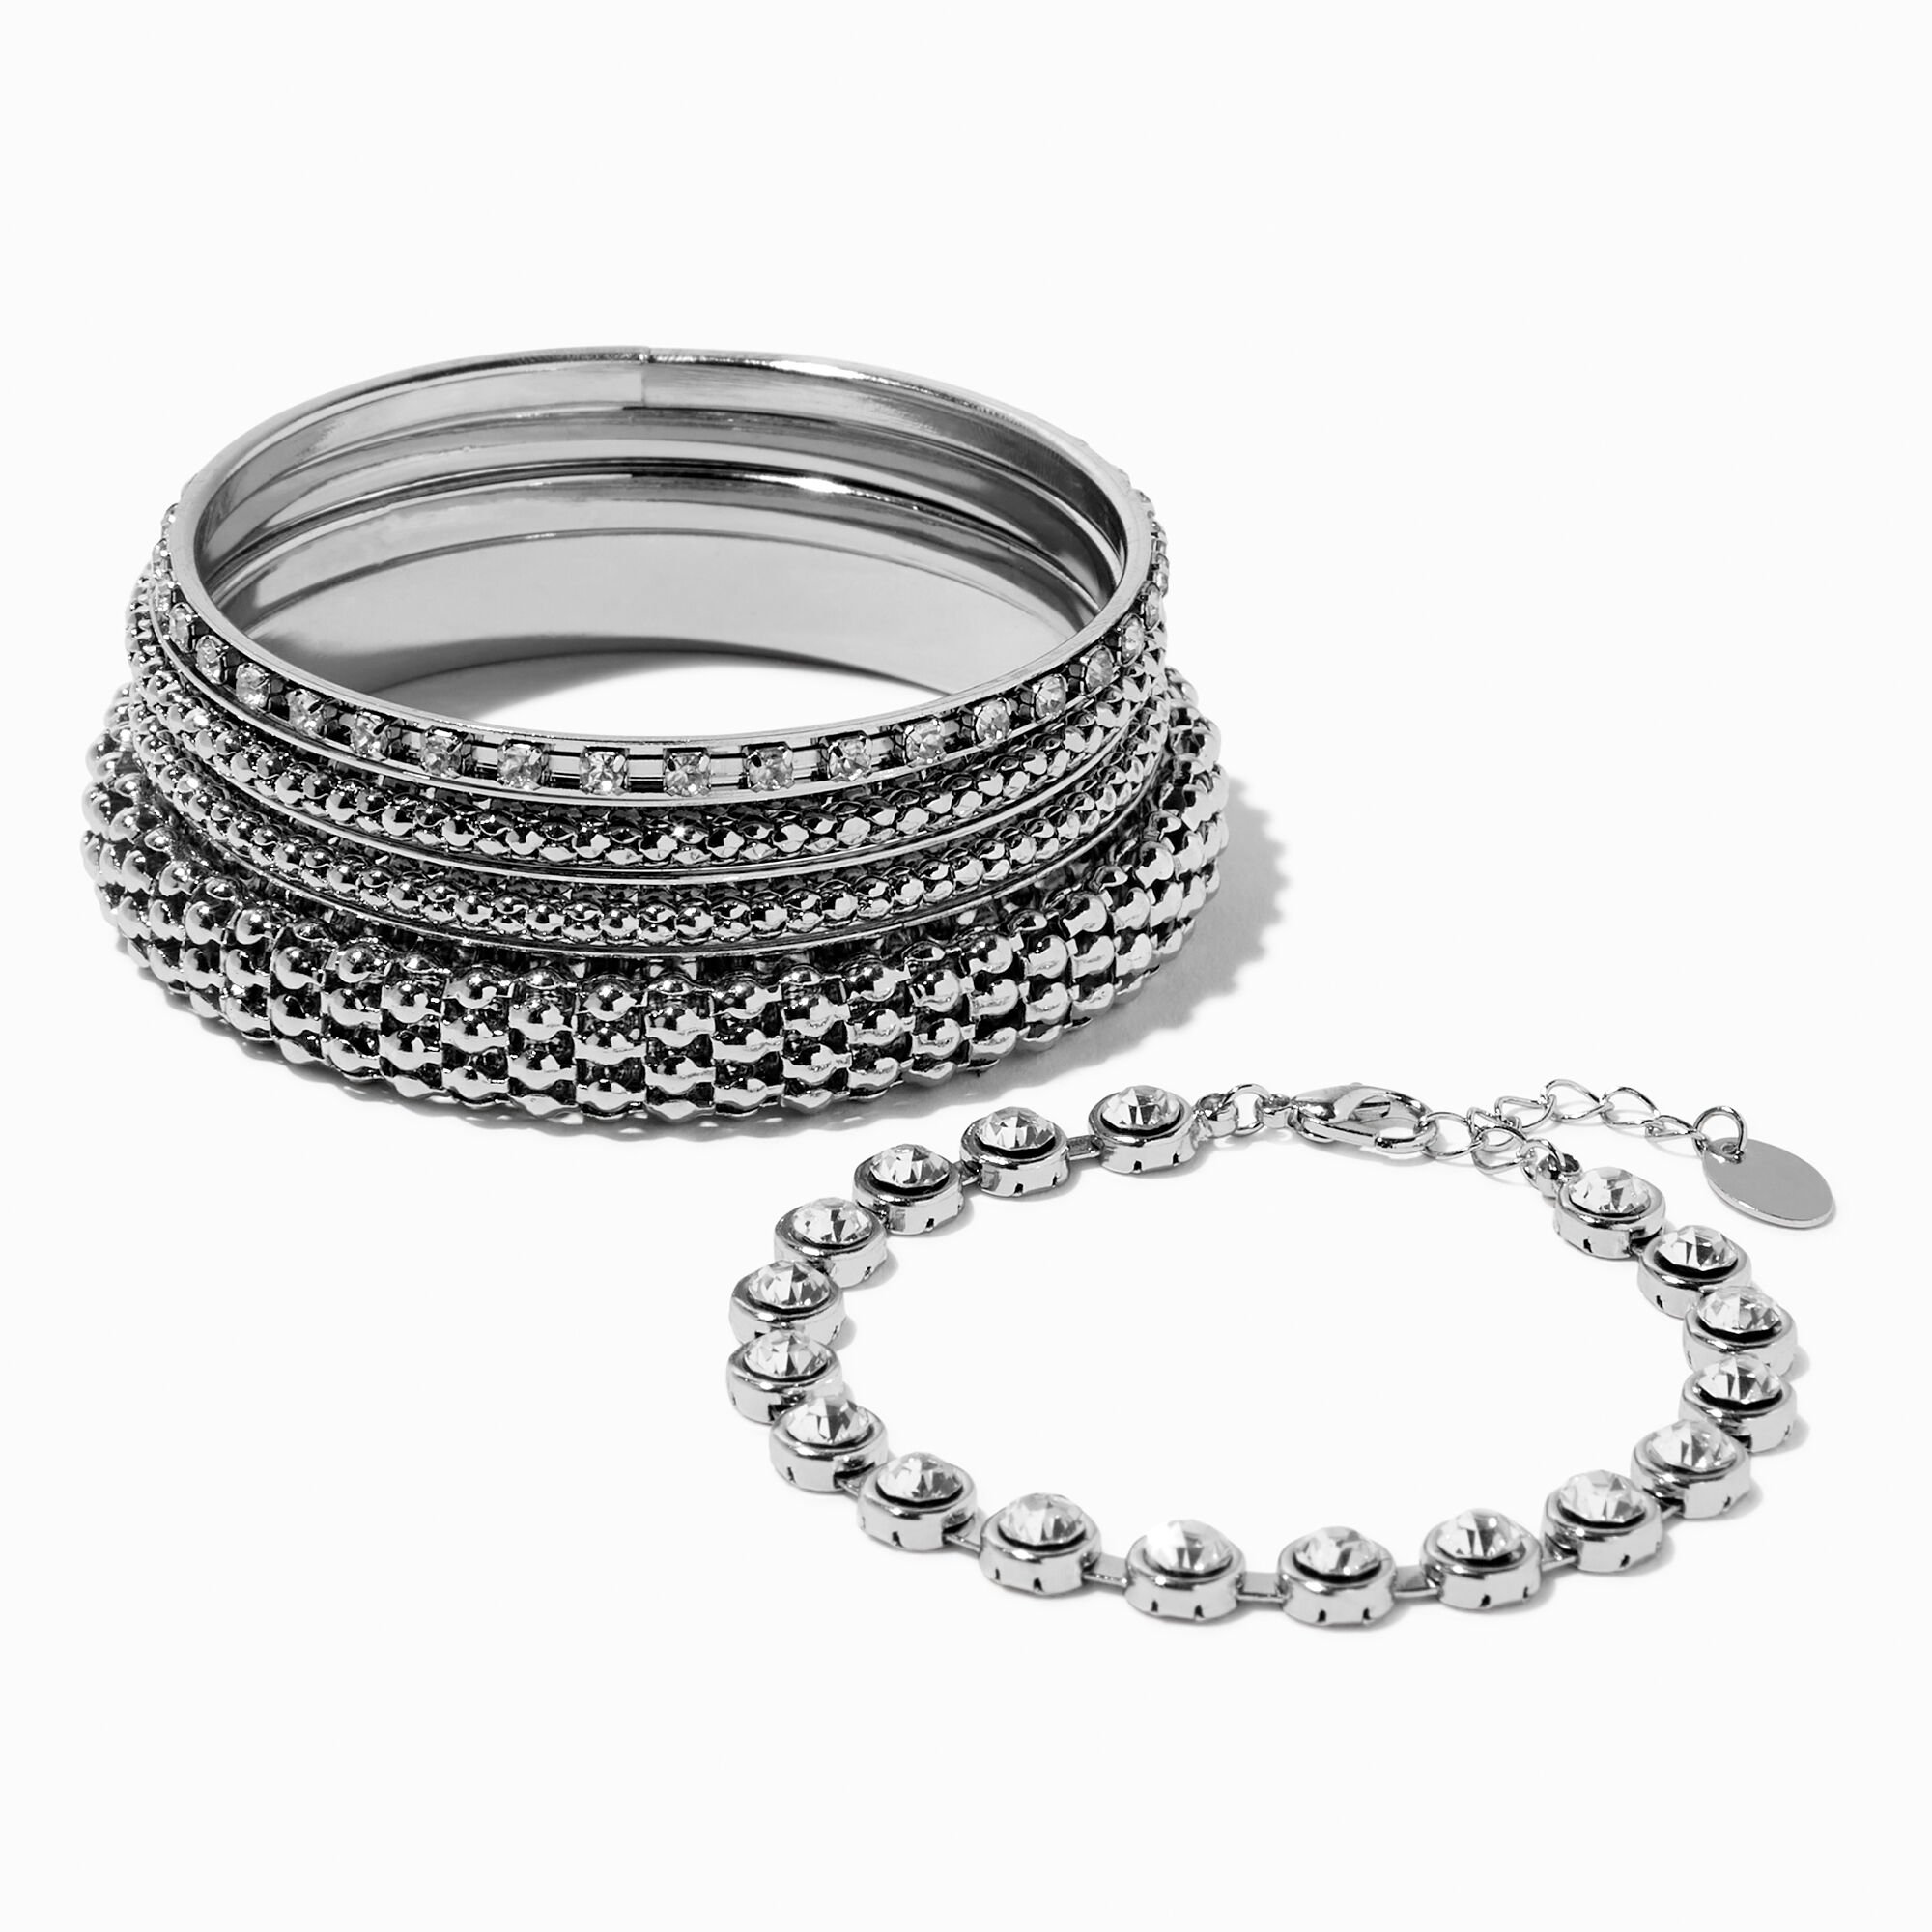 View Claires Tone Rhodium Crystal Bangle Bracelets 5 Pack Silver information